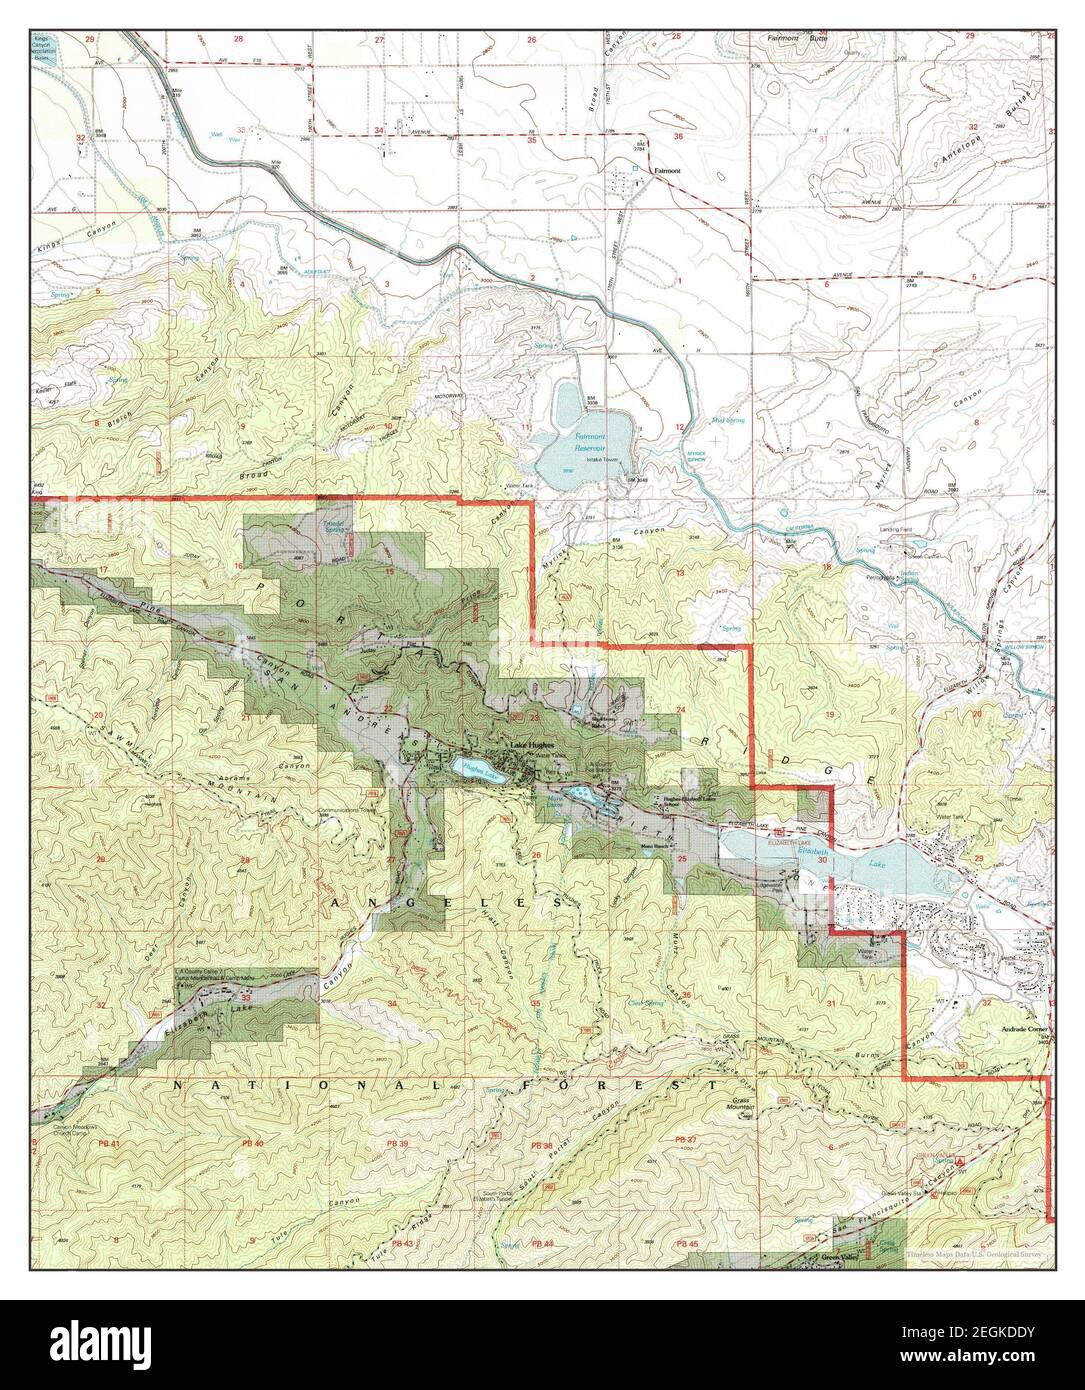 Lake Hughes, California, map 1995, 1:24000, United States of America by Timeless Maps, data U.S. Geological Survey Stock Photo